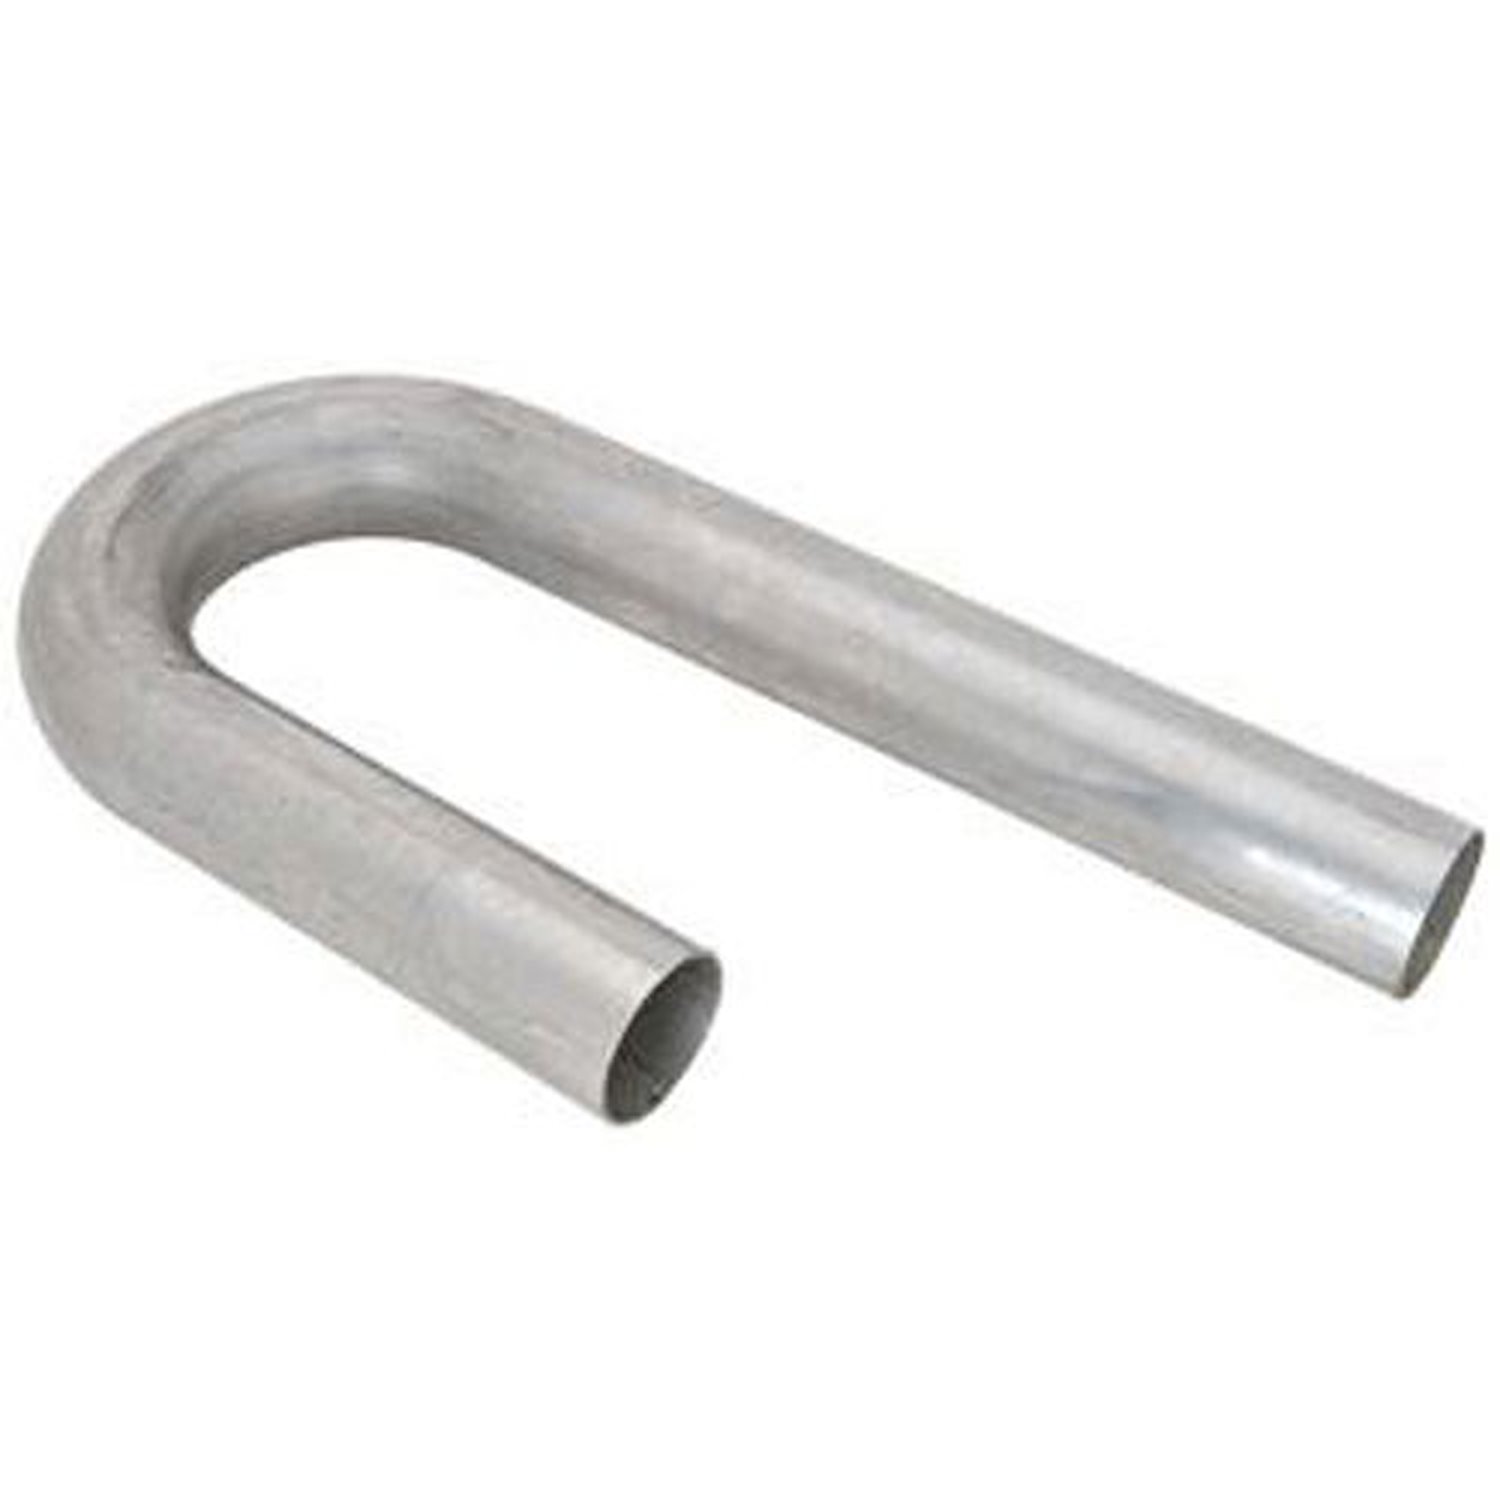 Stainless Steel 3" J-Bend